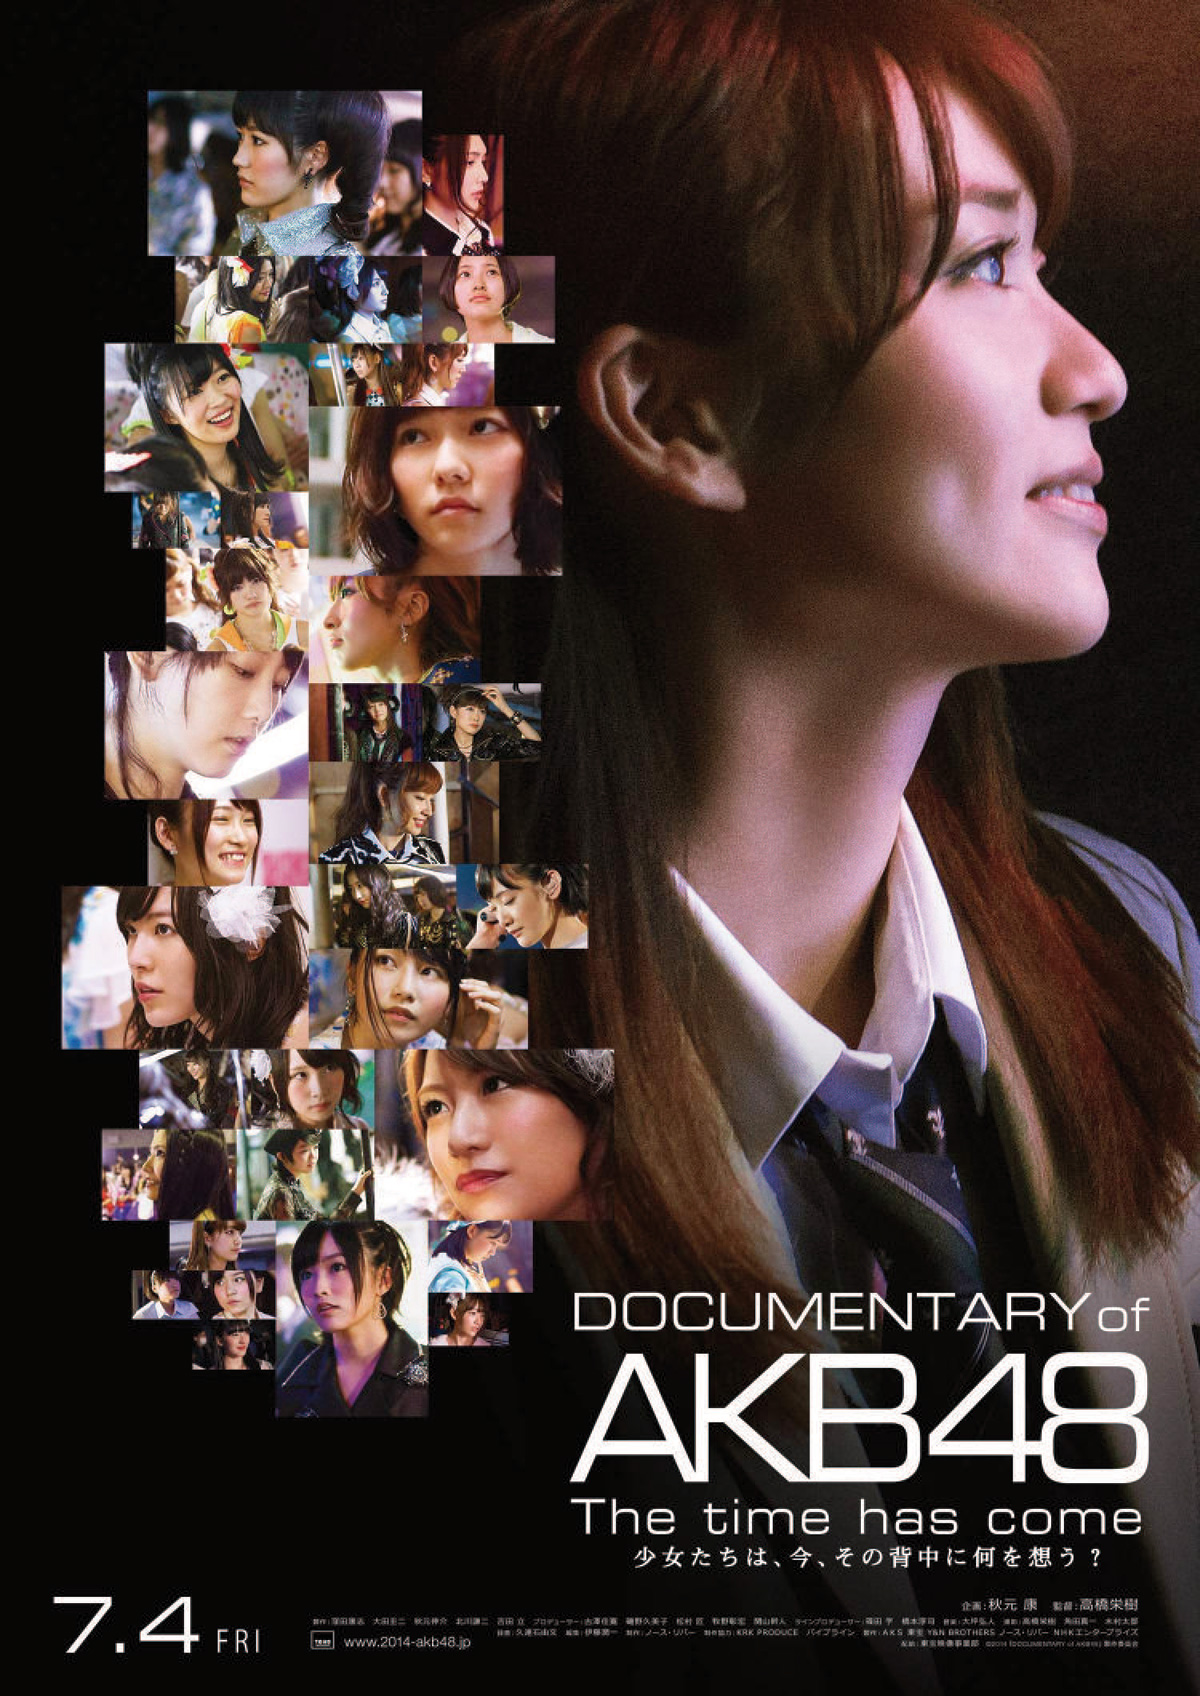 DOCUMENTARY of AKB48 The time has come 少女たちは、今、その背中に何を想う?の画像